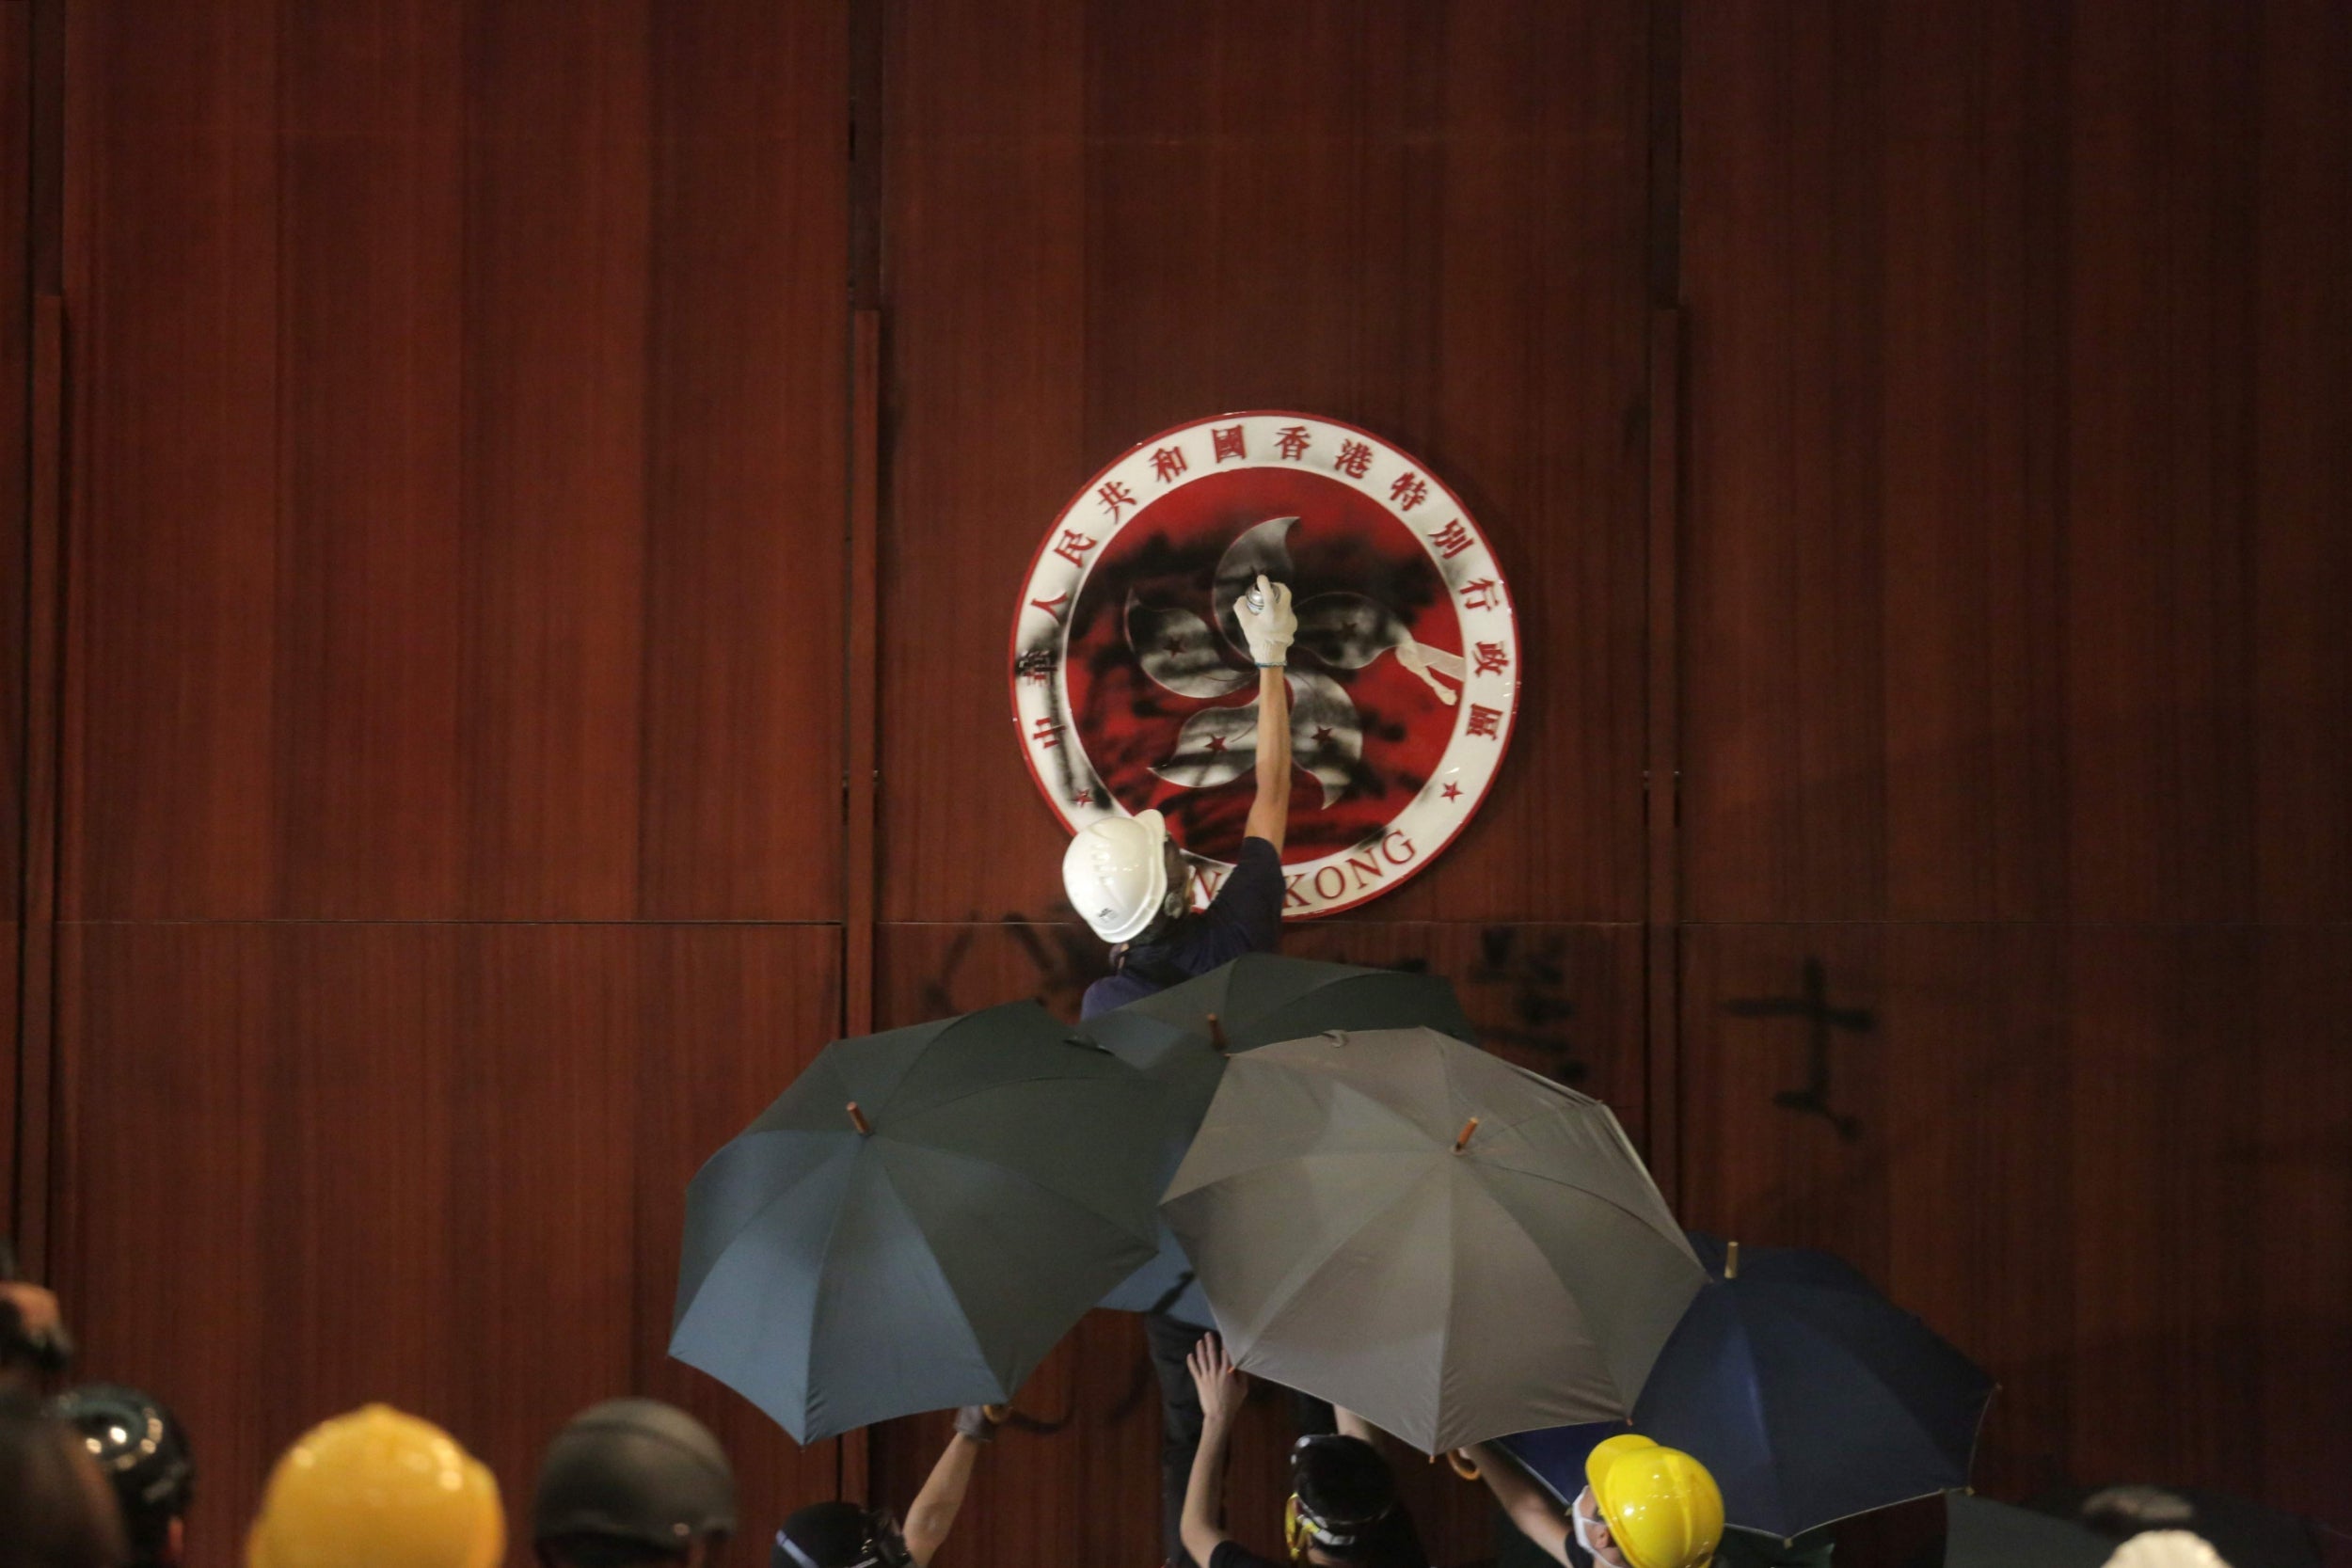 A protester defaces the Hong Kong emblem after protesters broke into the government headquarters in Hong Kong